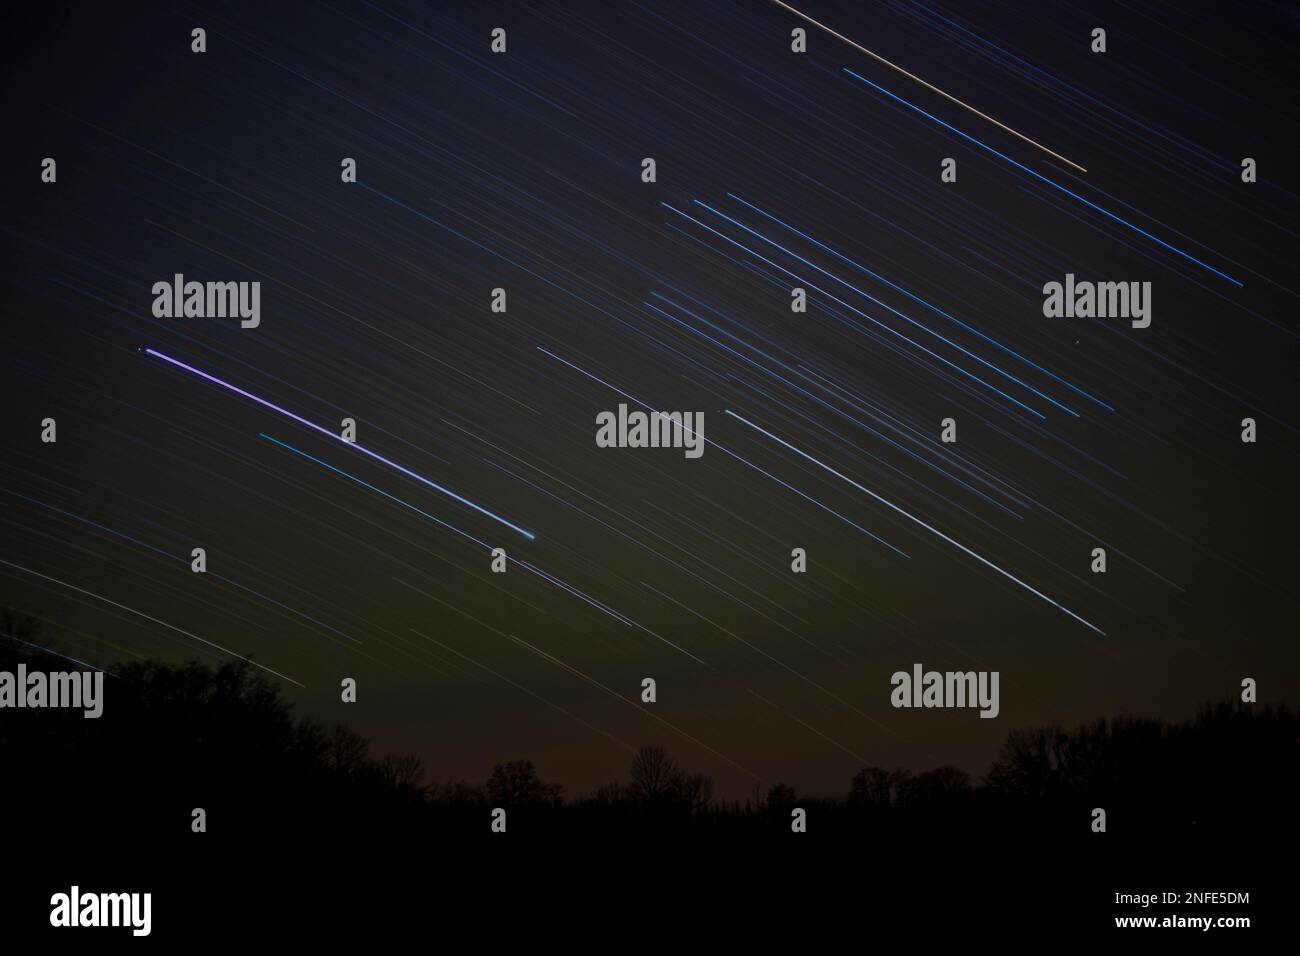 Time interval of stars in the night sky. Stock Photo